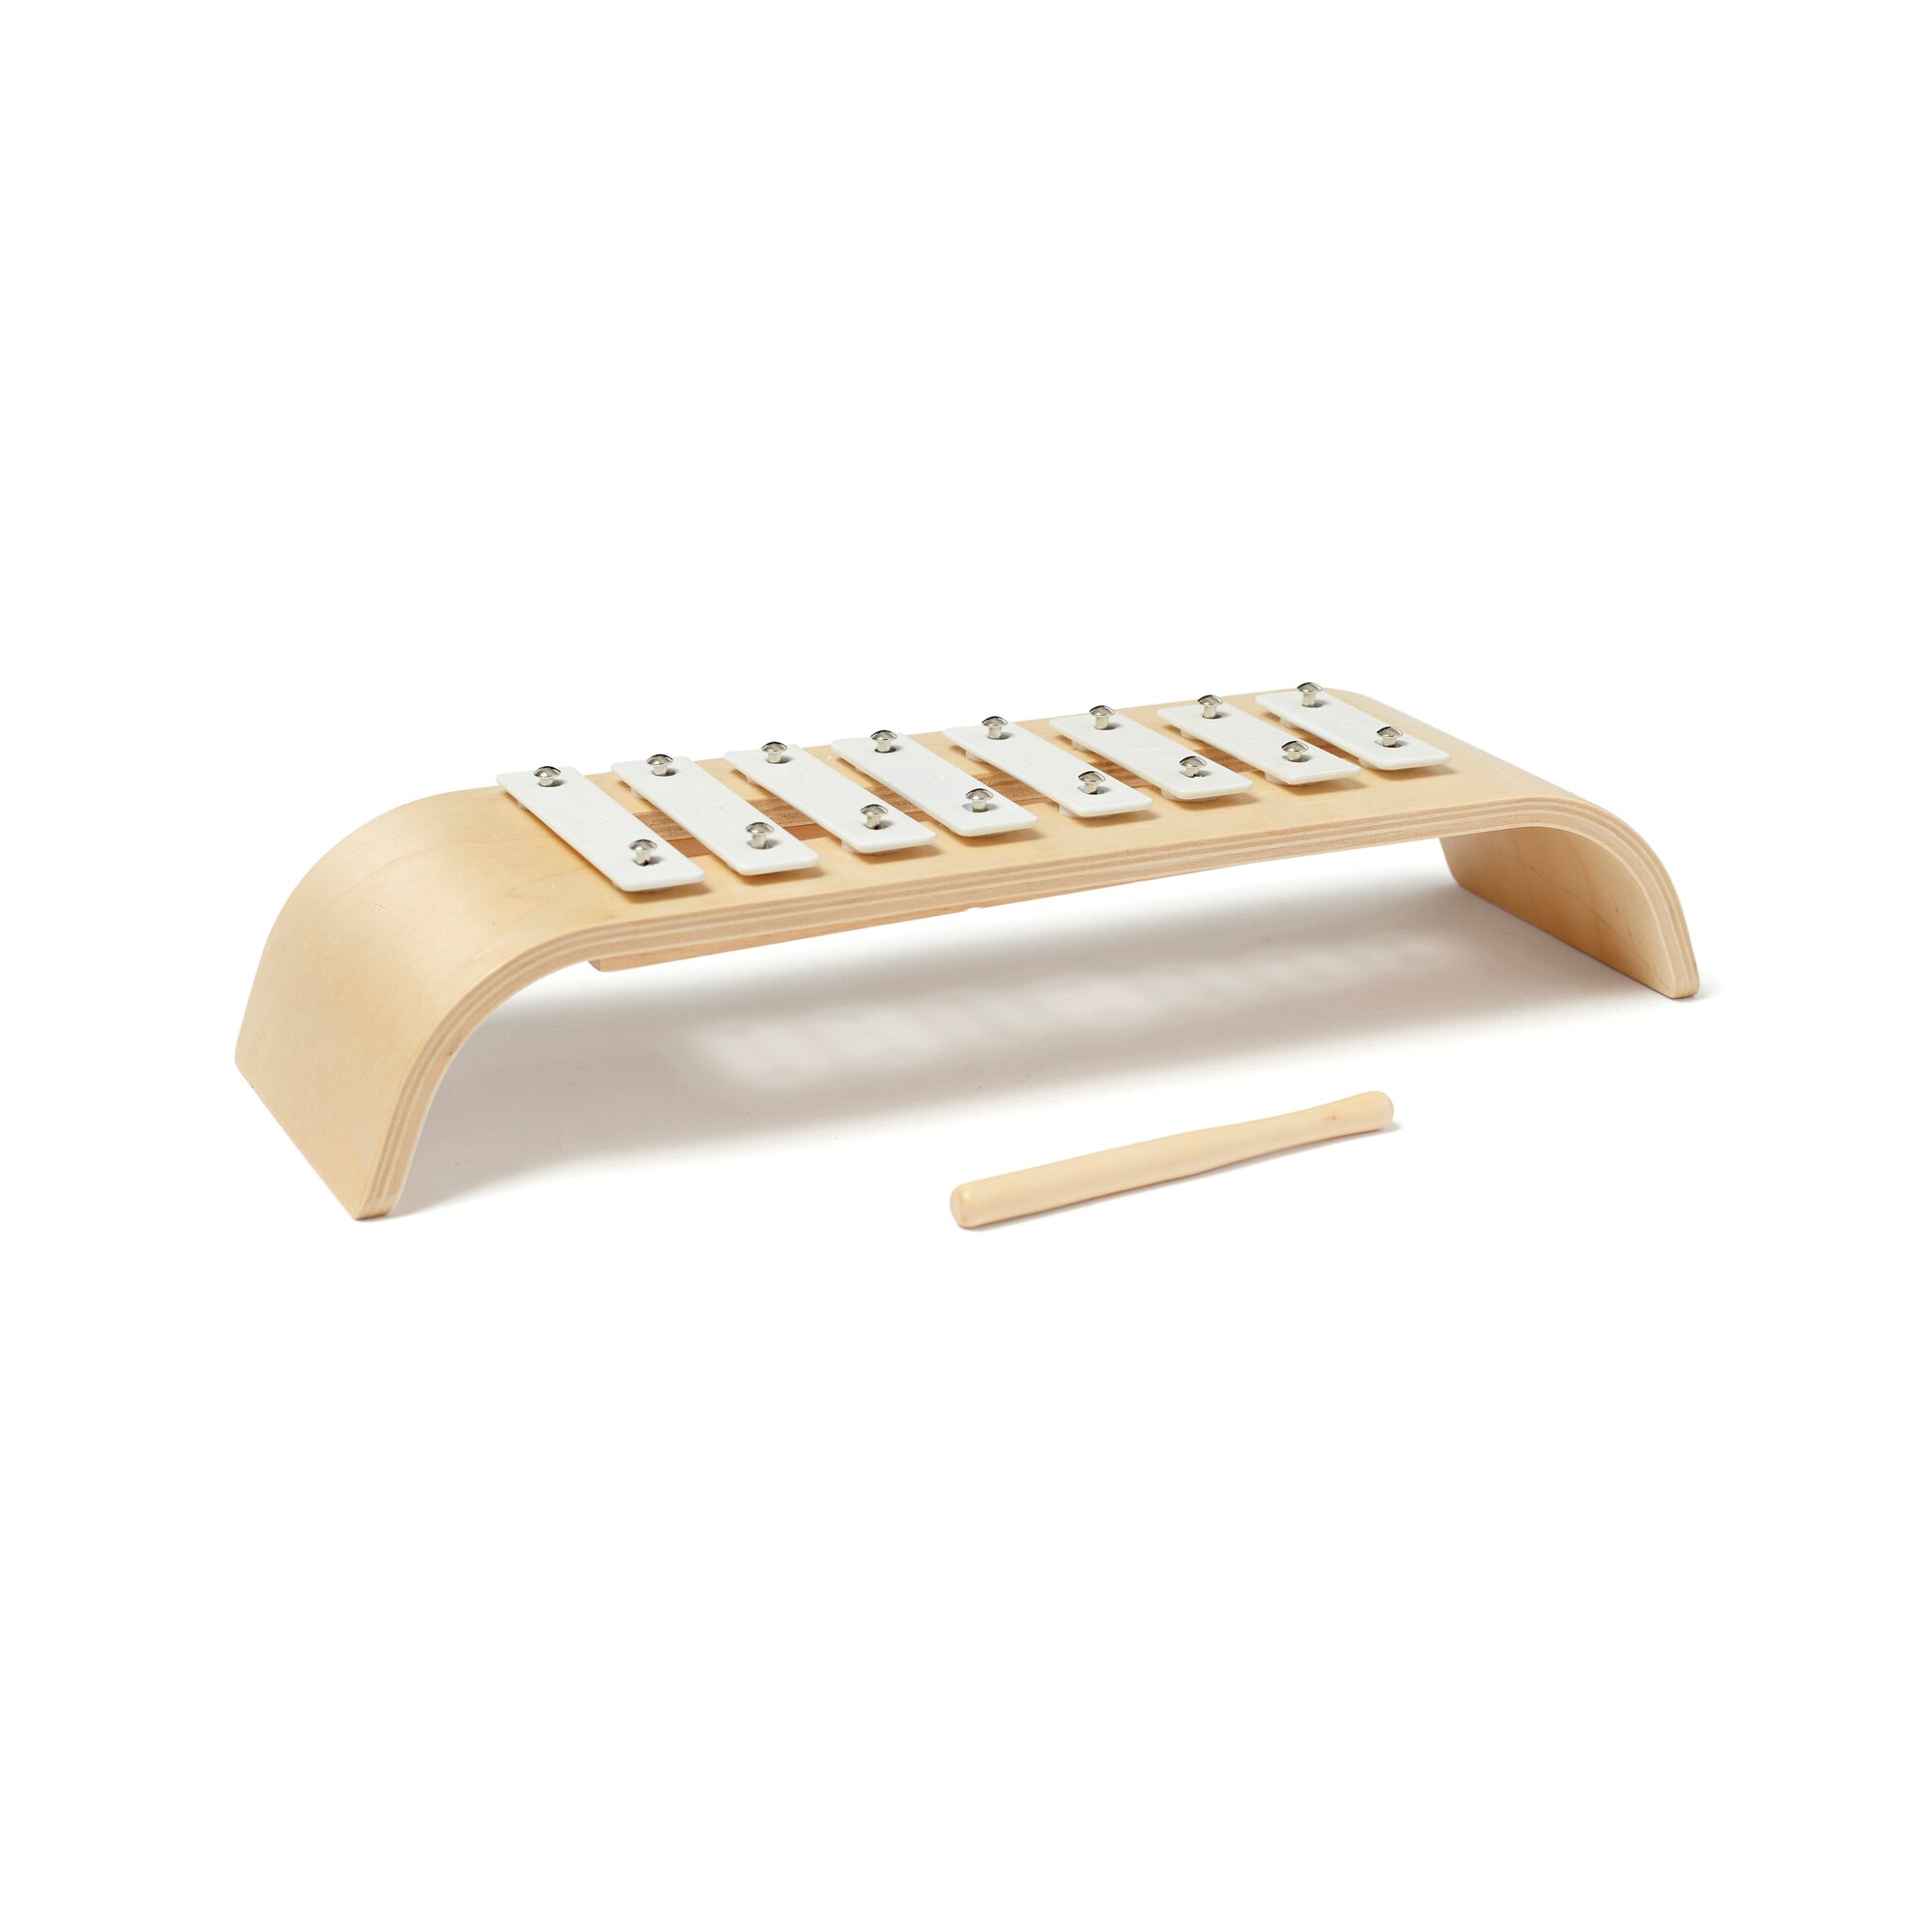 Kids Concept Kids Concept Wooden Toy Xylophone - White